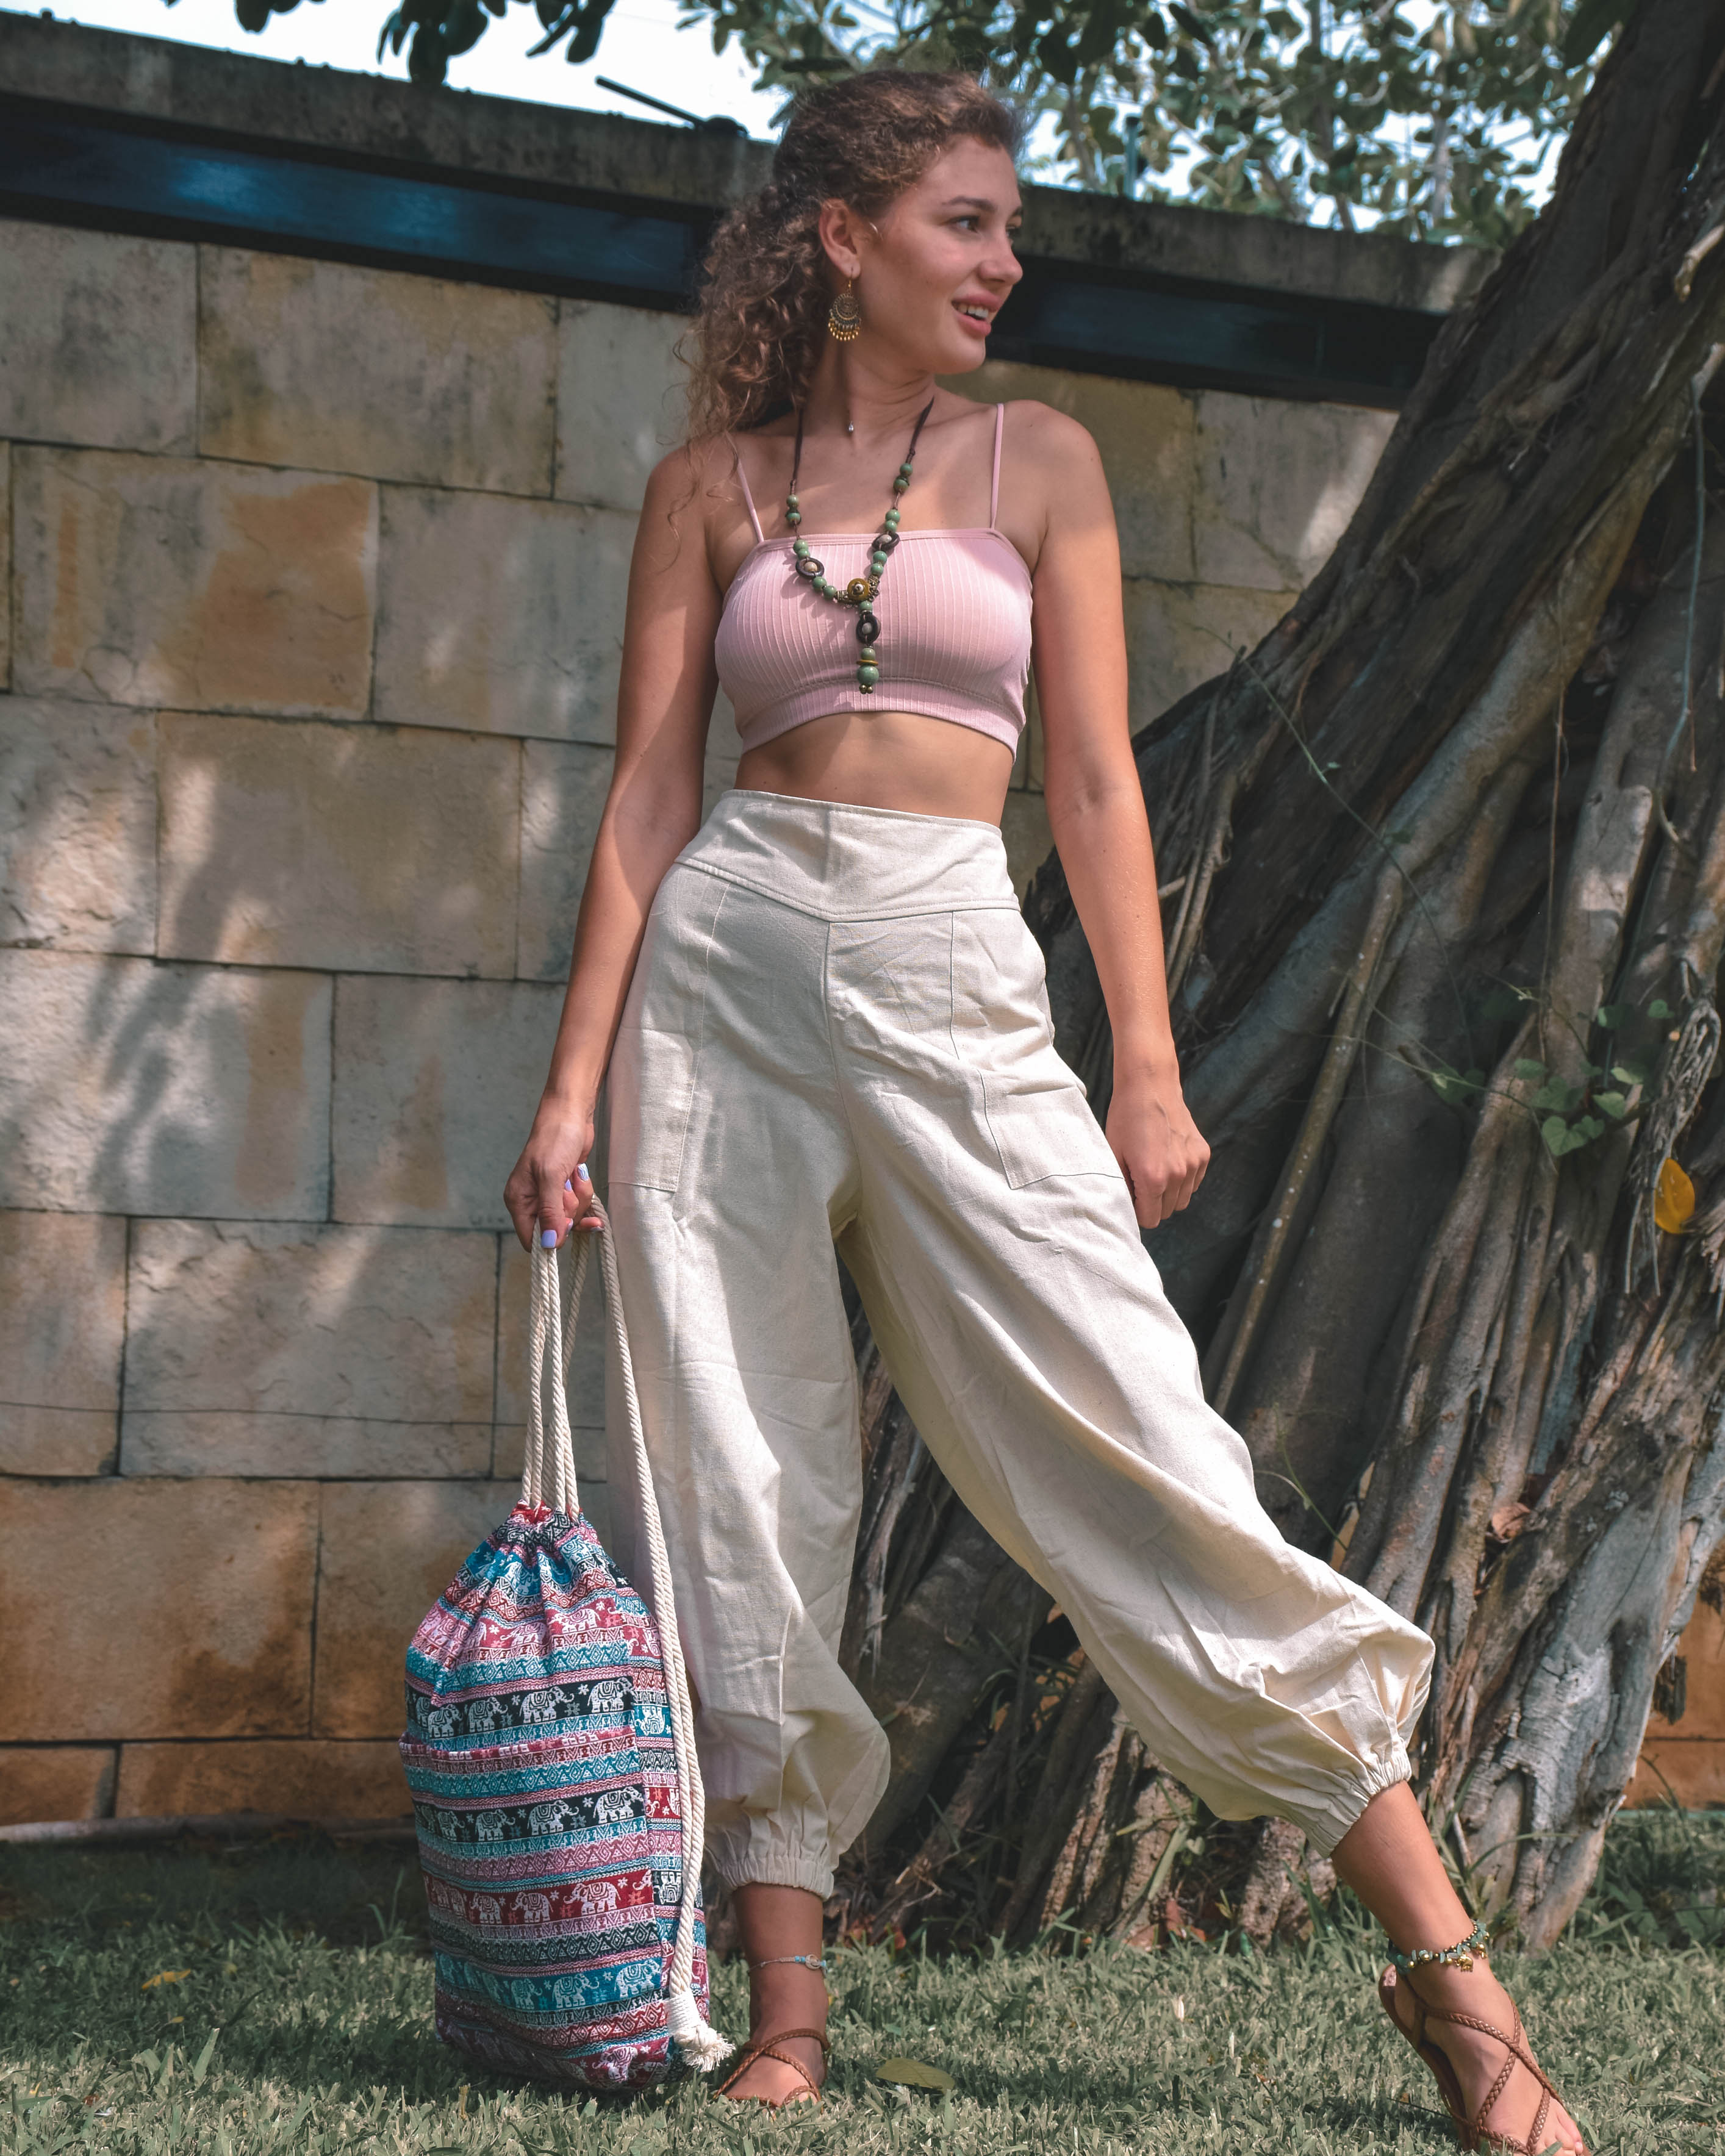 MANDALAY TOP Elepanta Women's Top - Buy Today Elephant Pants Jewelry And Bohemian Clothes Handmade In Thailand Help To Save The Elephants FairTrade And Vegan